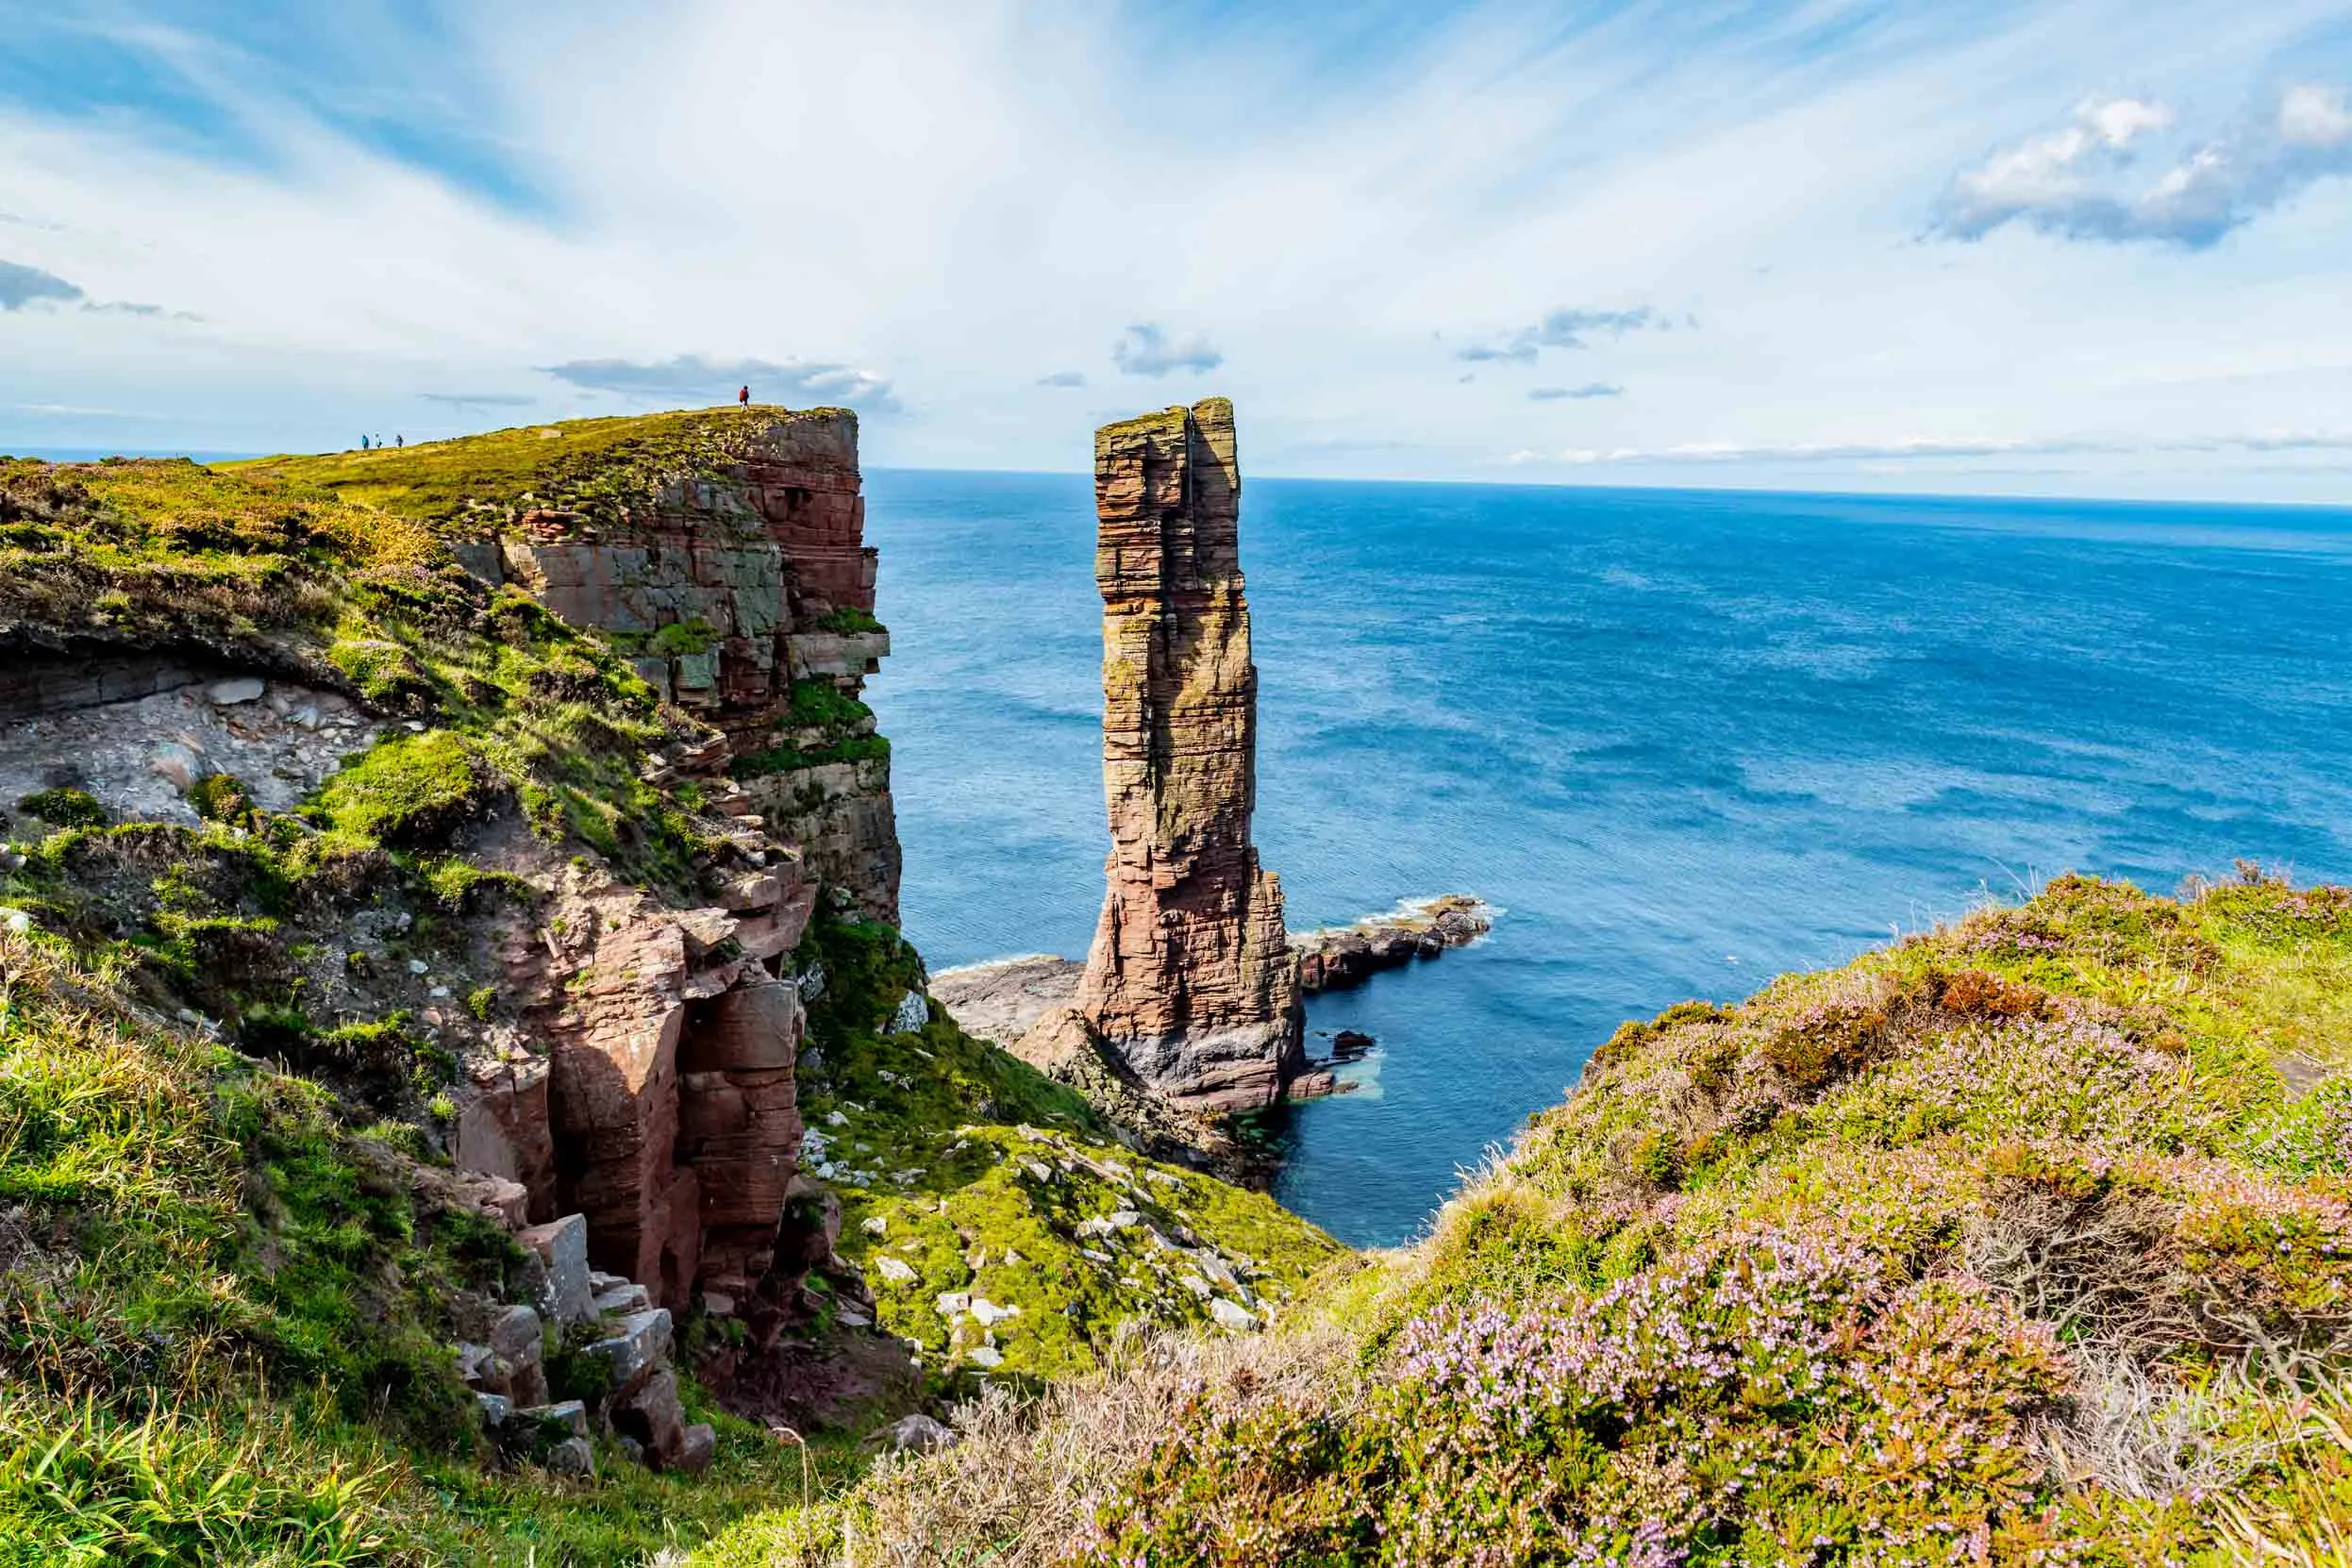 As we stand on the grassy cliffs at Hoy, The Old Man sea stack formation stands tall in the bright blue waters.